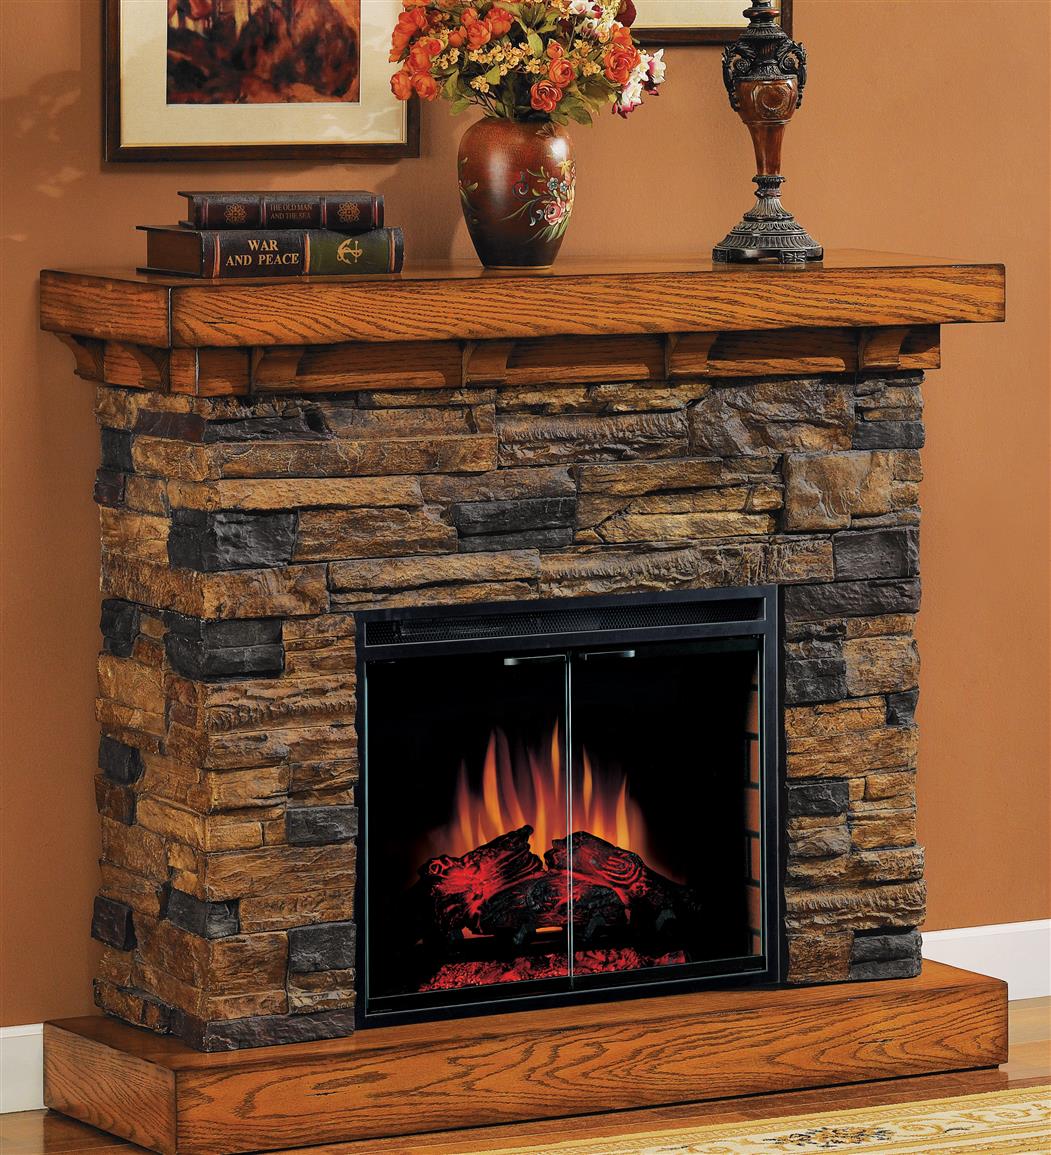 New Flagstone Fireplace Pictures for Simple Design